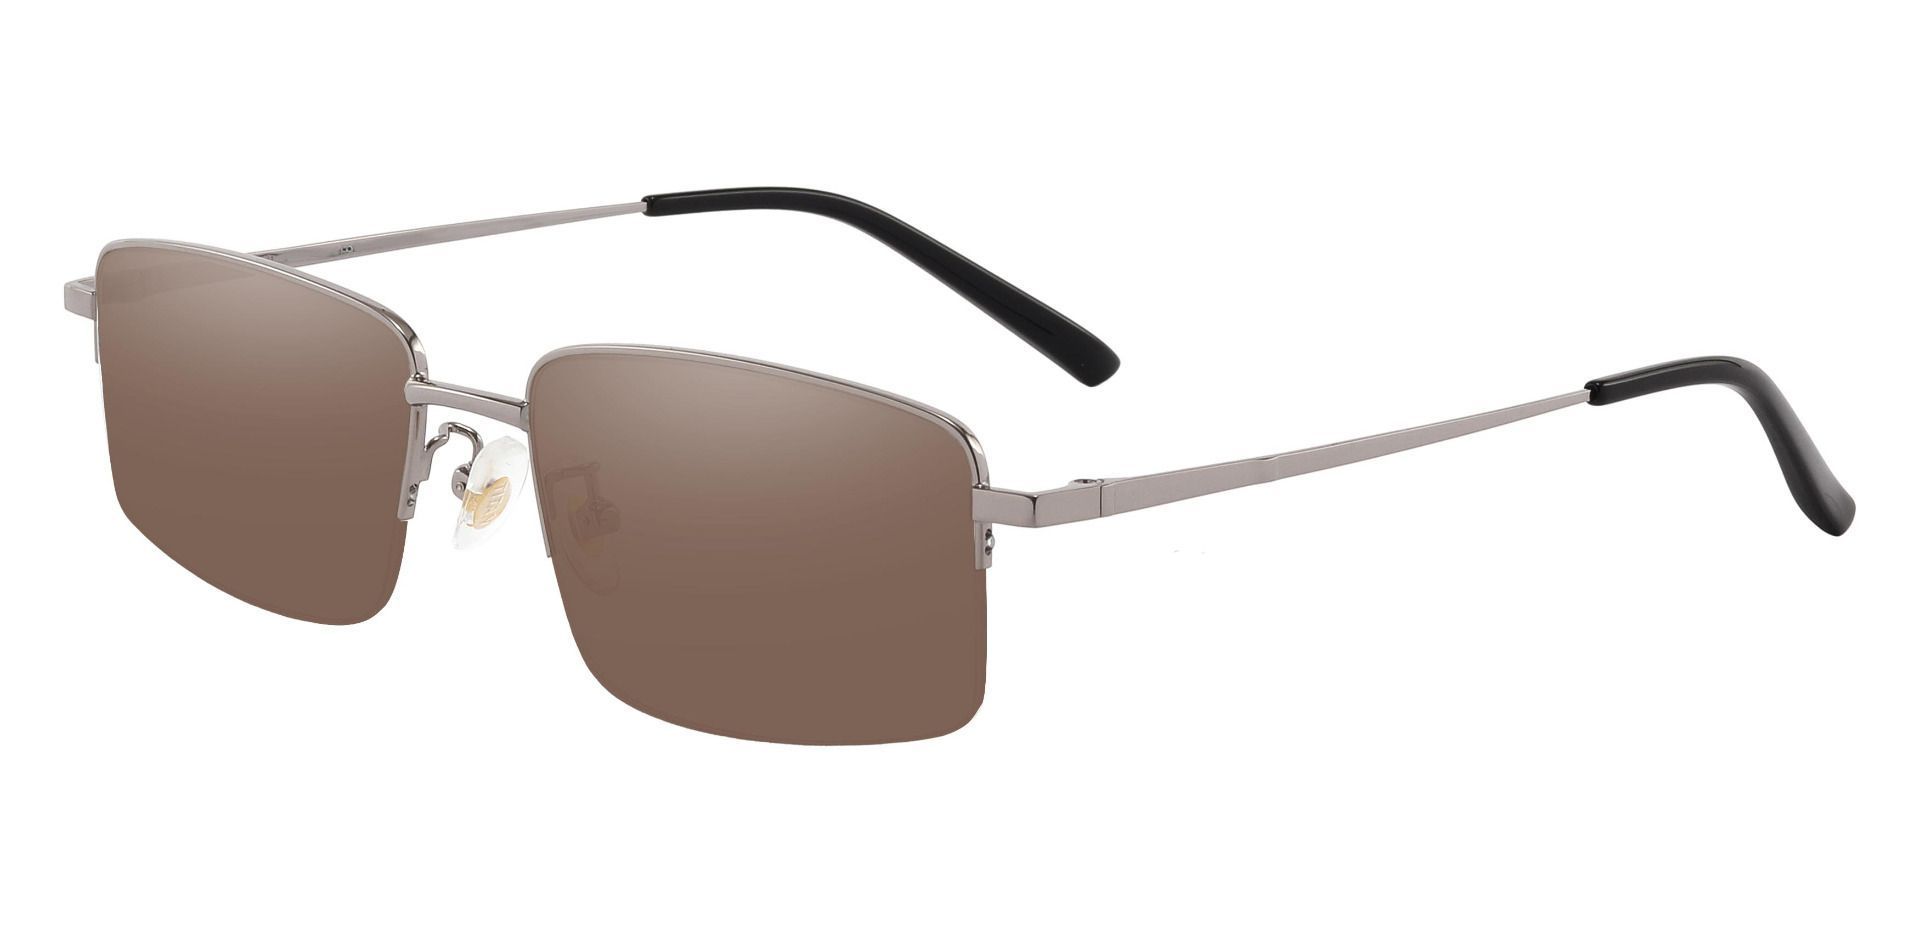 Wayne Rectangle Lined Bifocal Sunglasses - Gray Frame With Brown Lenses